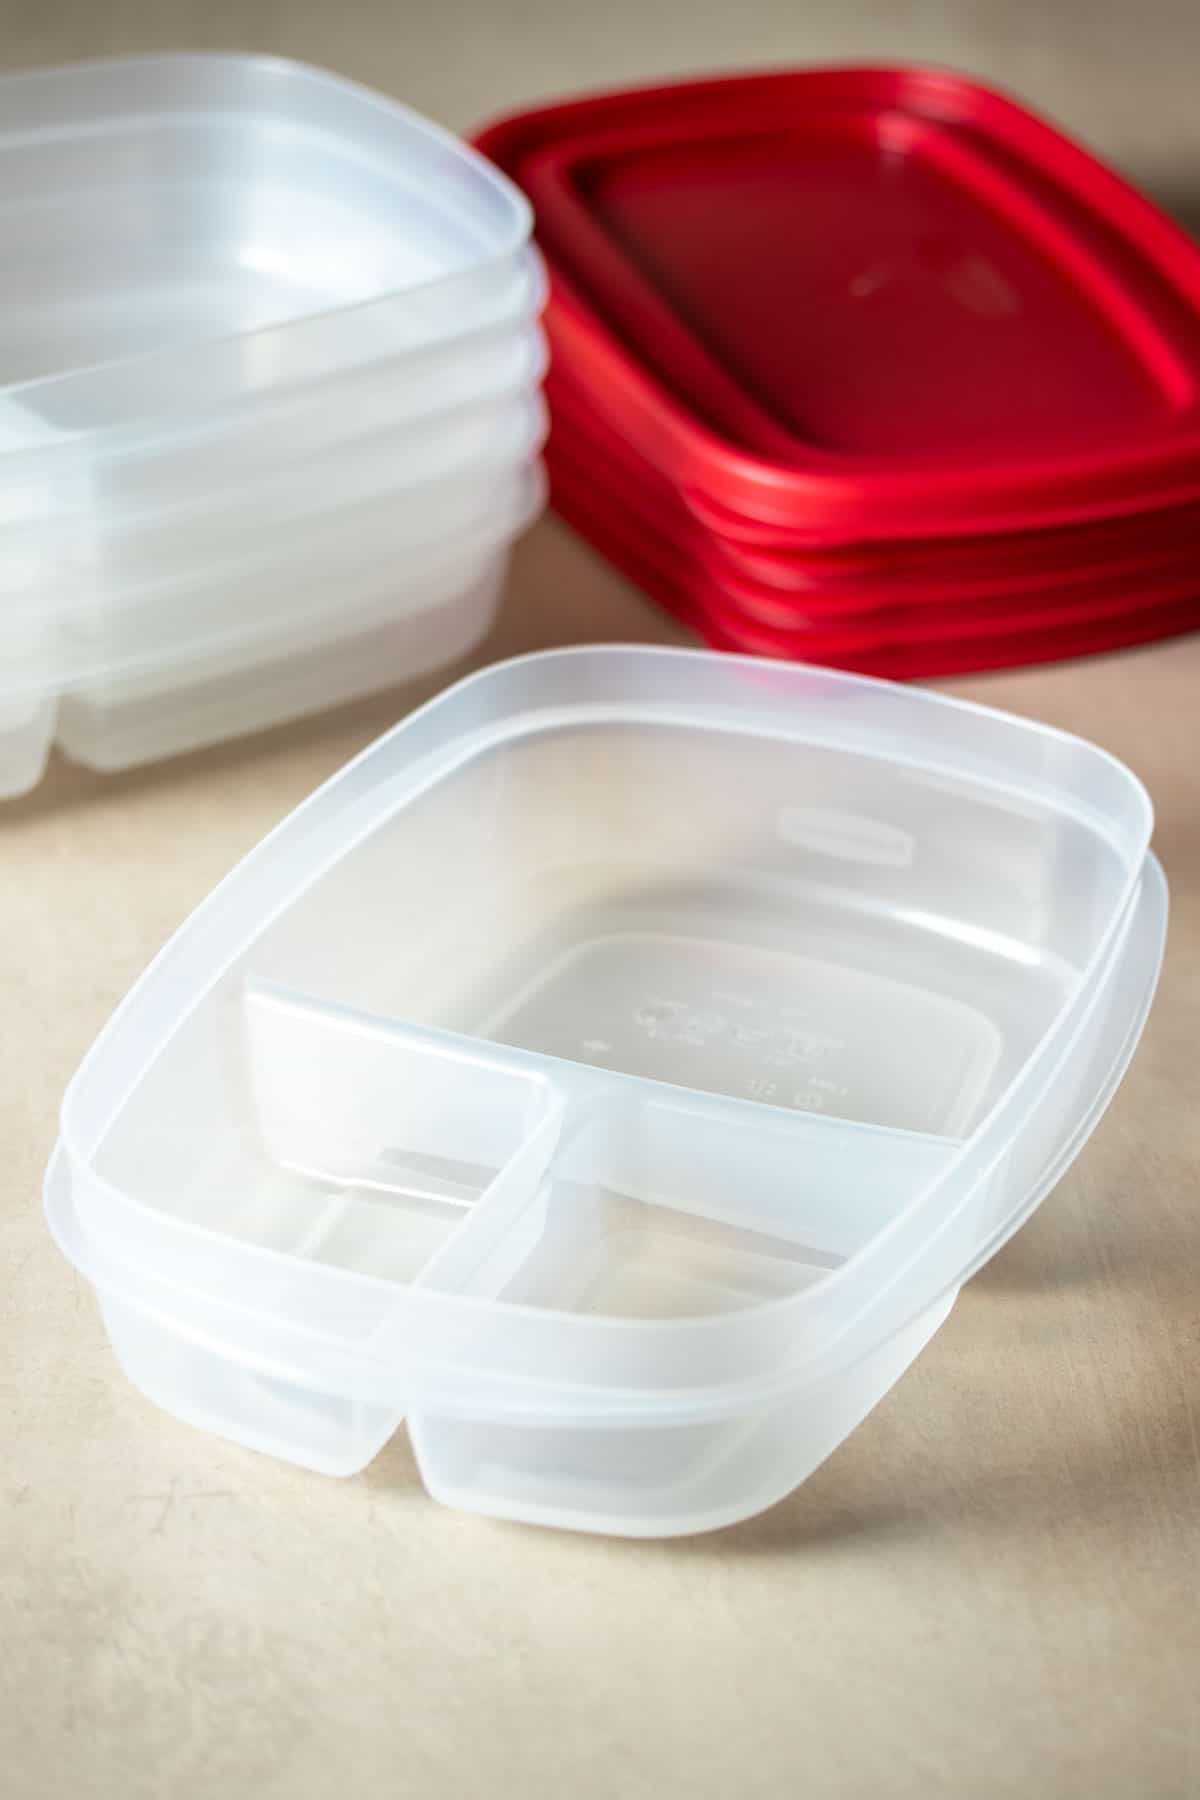 A plastic container with sections in front of a stack of them and a stack of red lids for them.